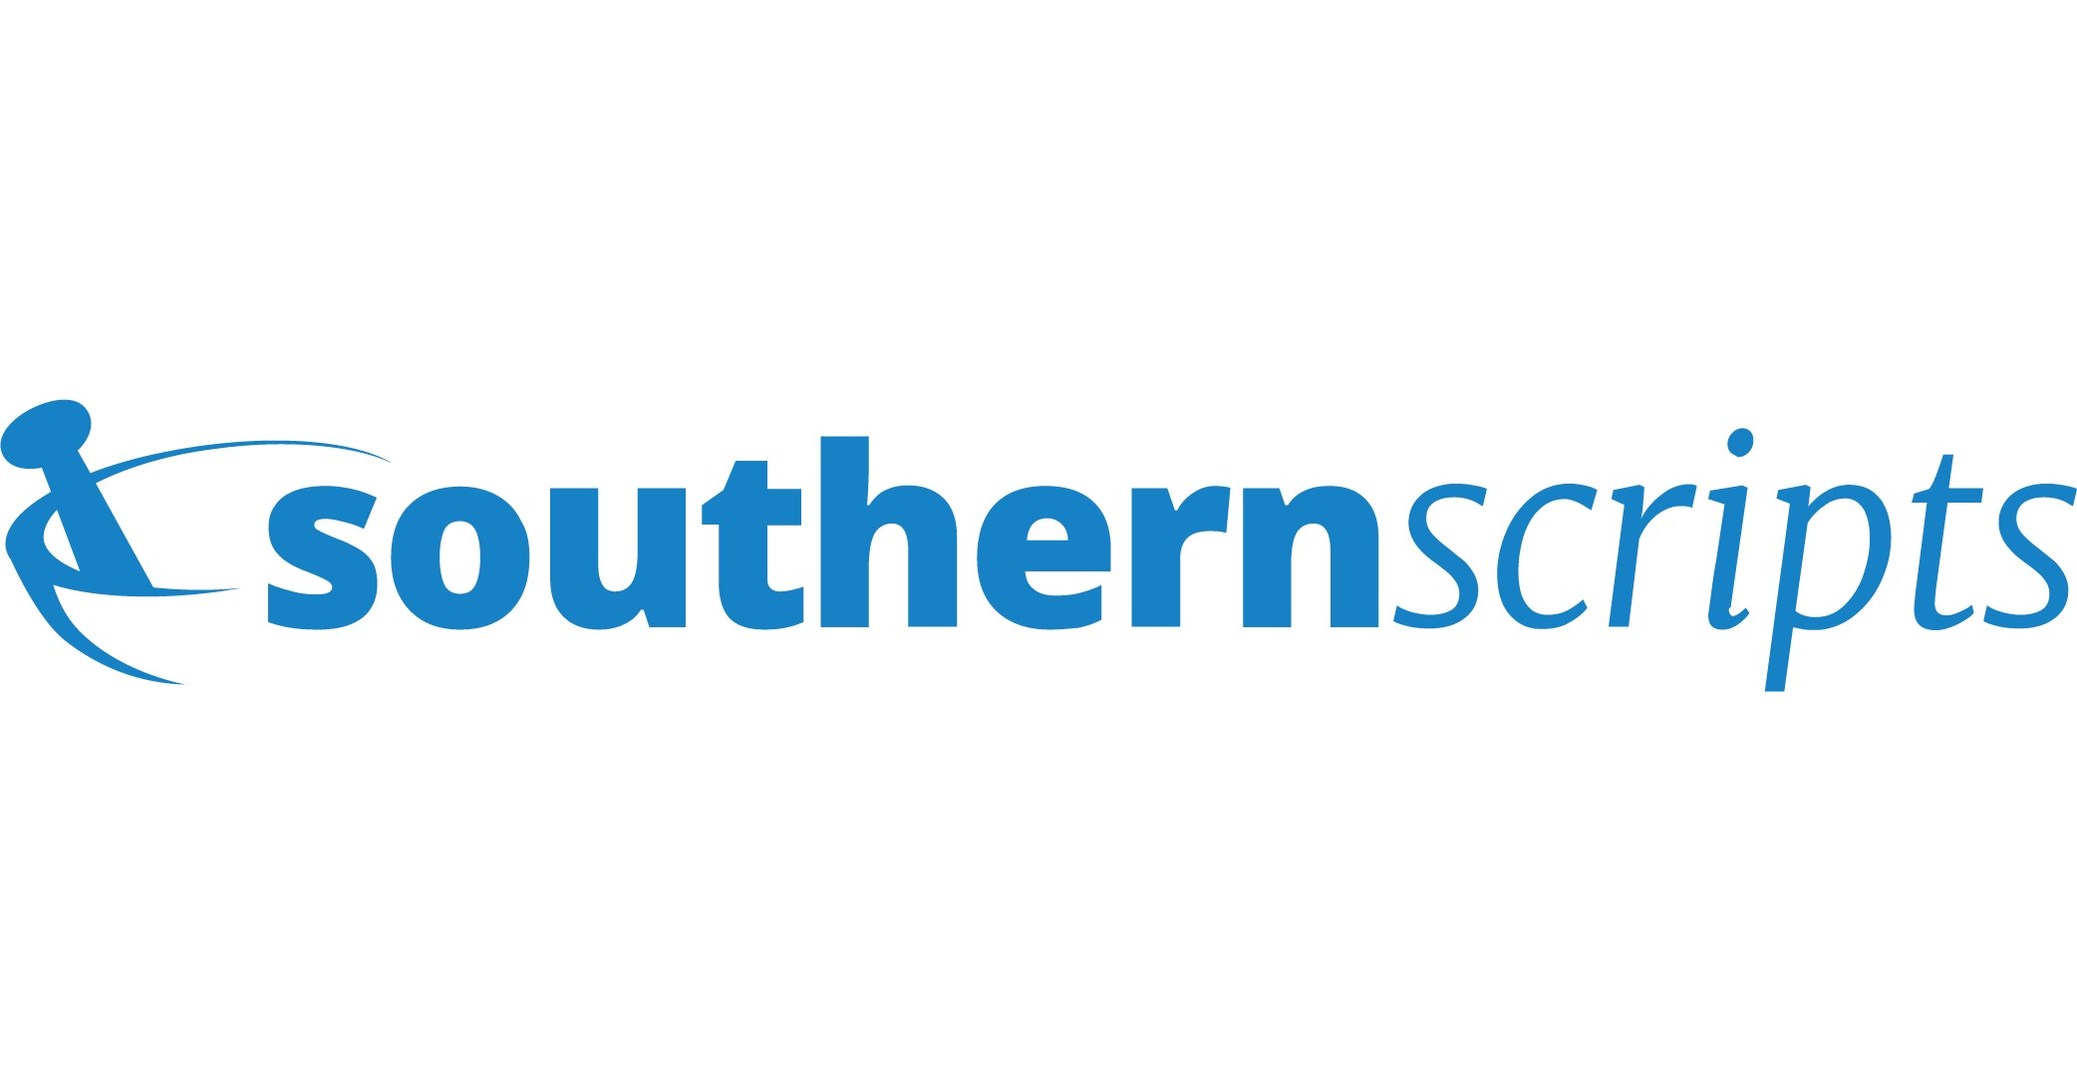 Southern Scripts Honored as 2022 Louisiana Growth Leader